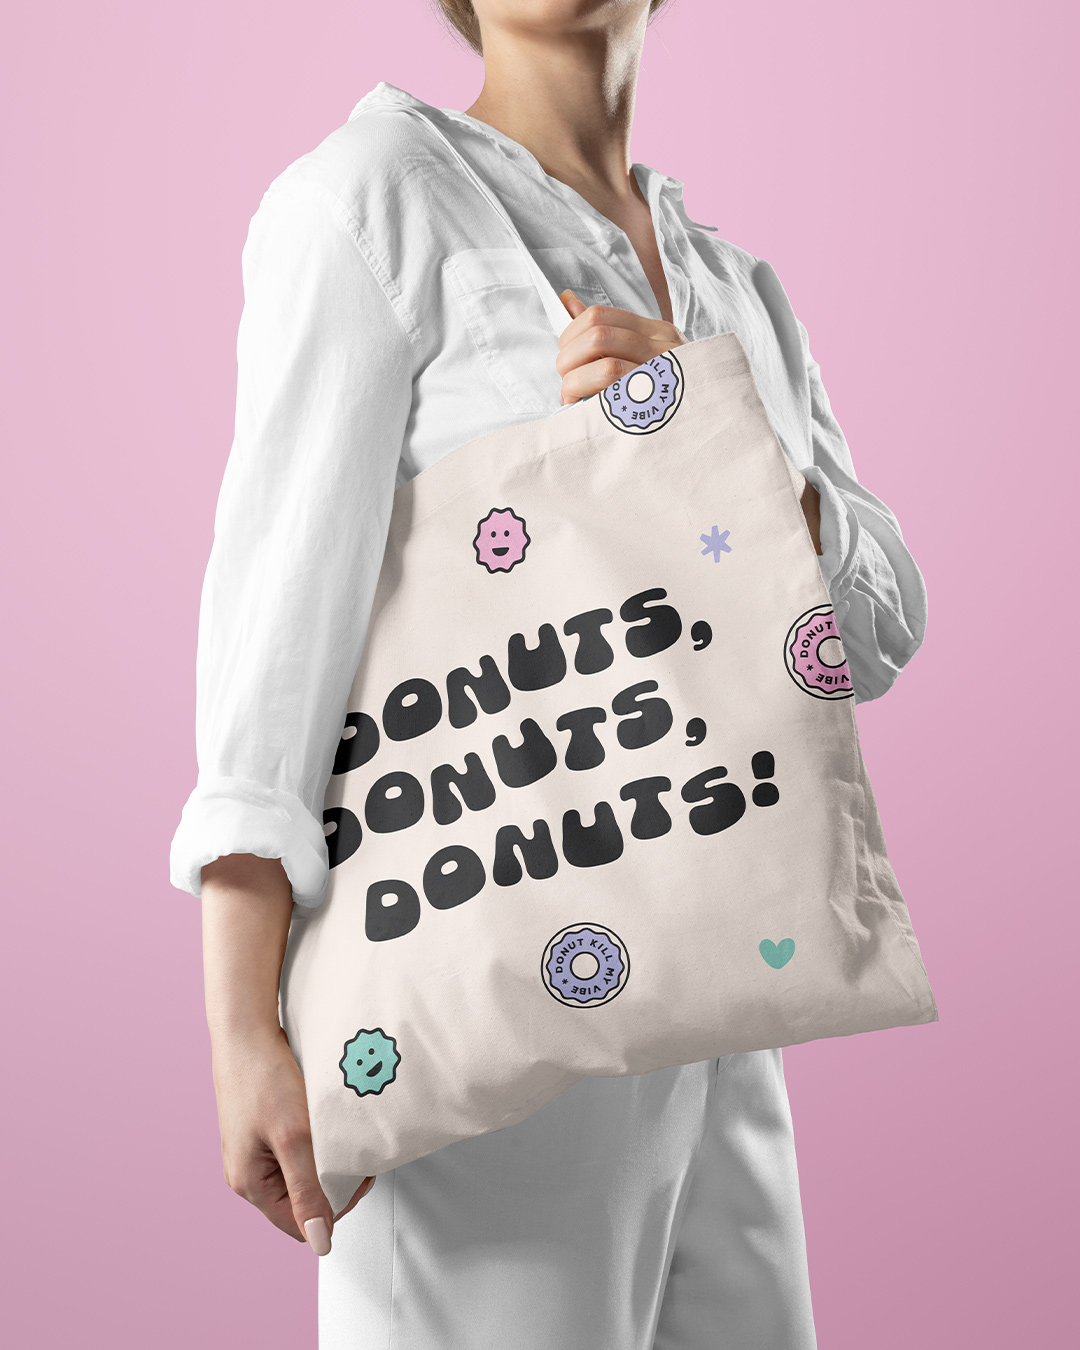 Tote bag for Dough Joy, a plant-based, yeast-raised donut truck in Seattle - designed by Wiltshire-based graphic designer, Kaye Huett